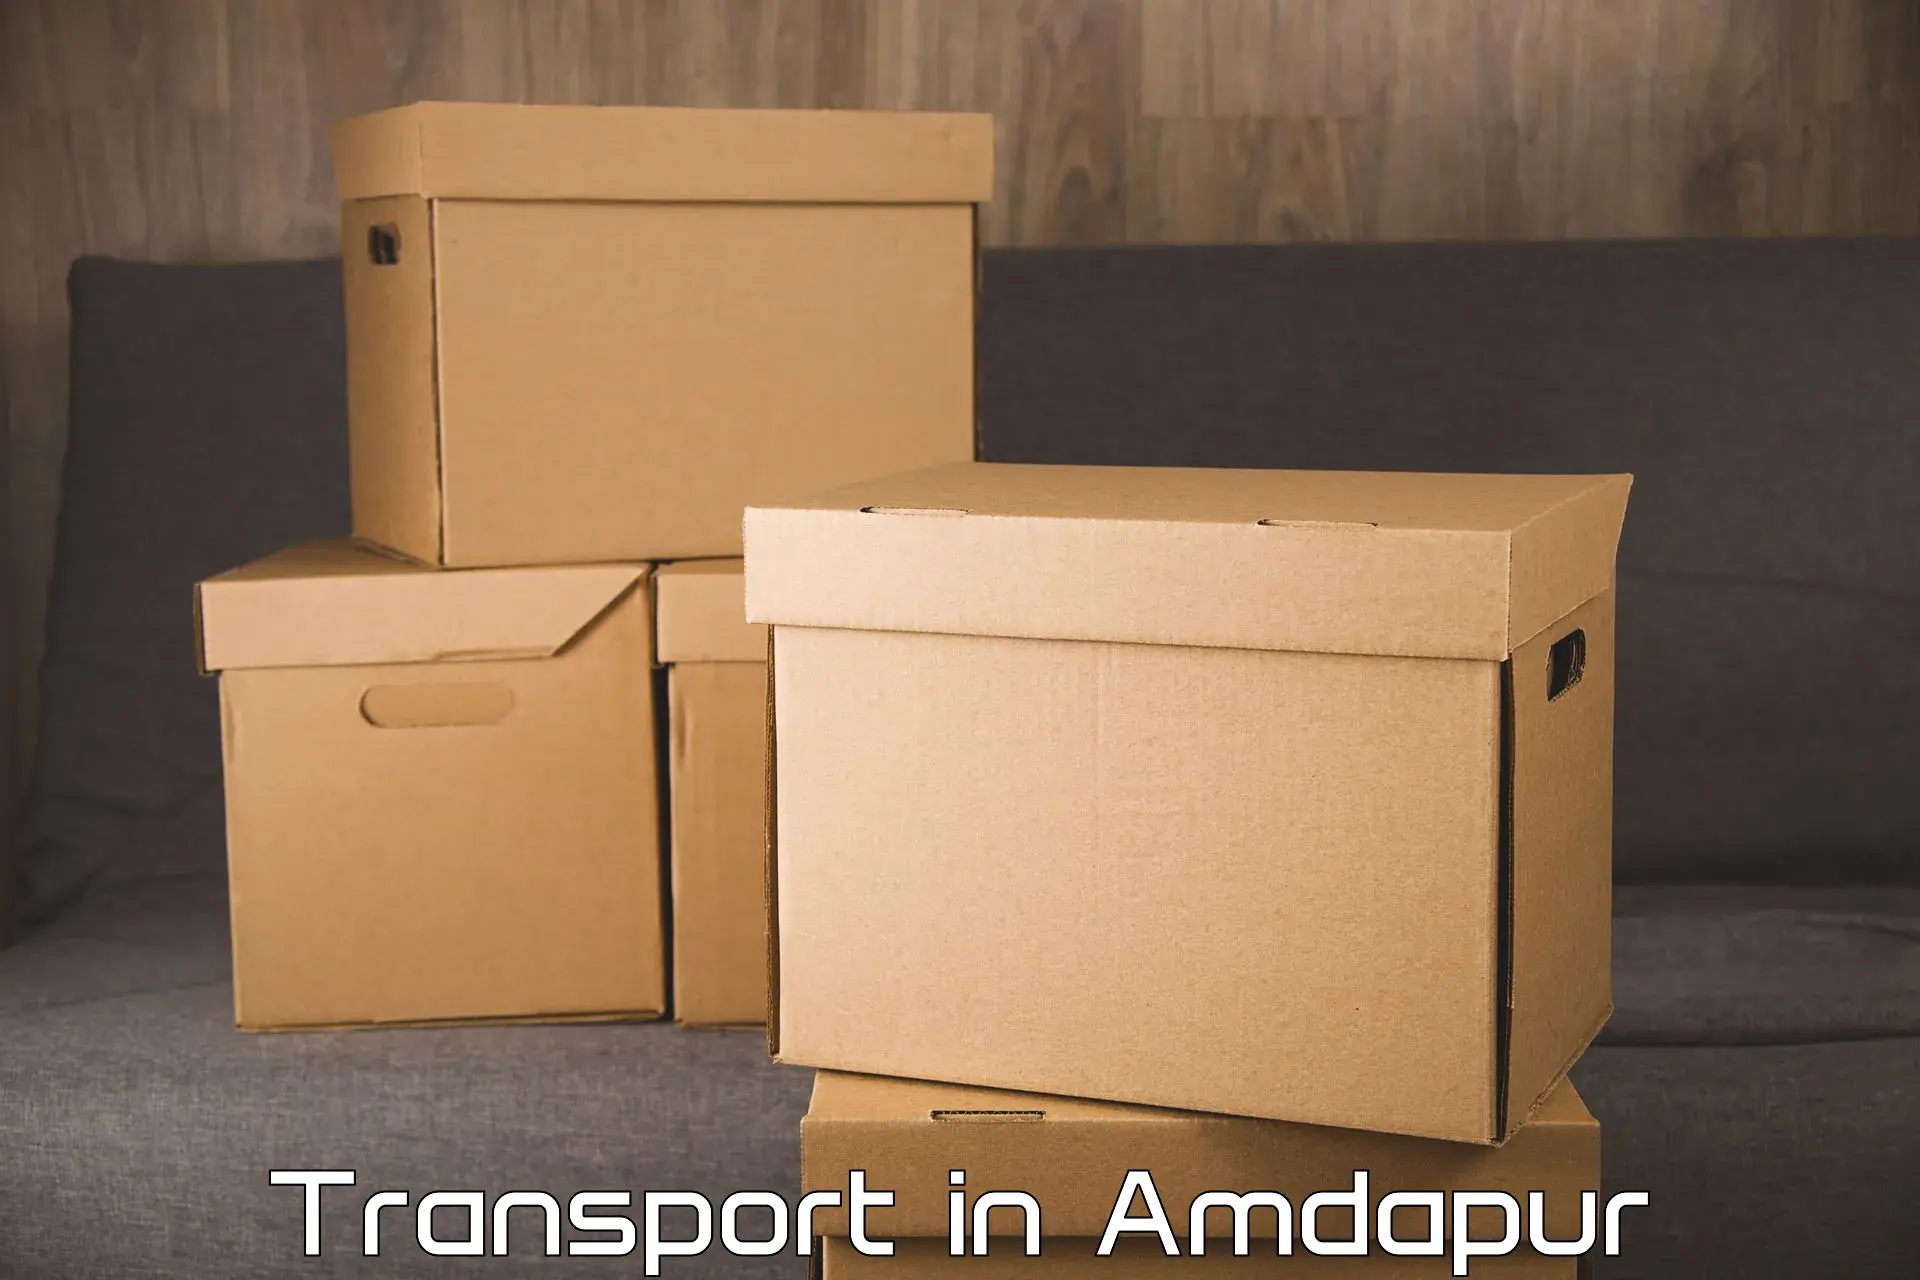 Cycle transportation service in Amdapur